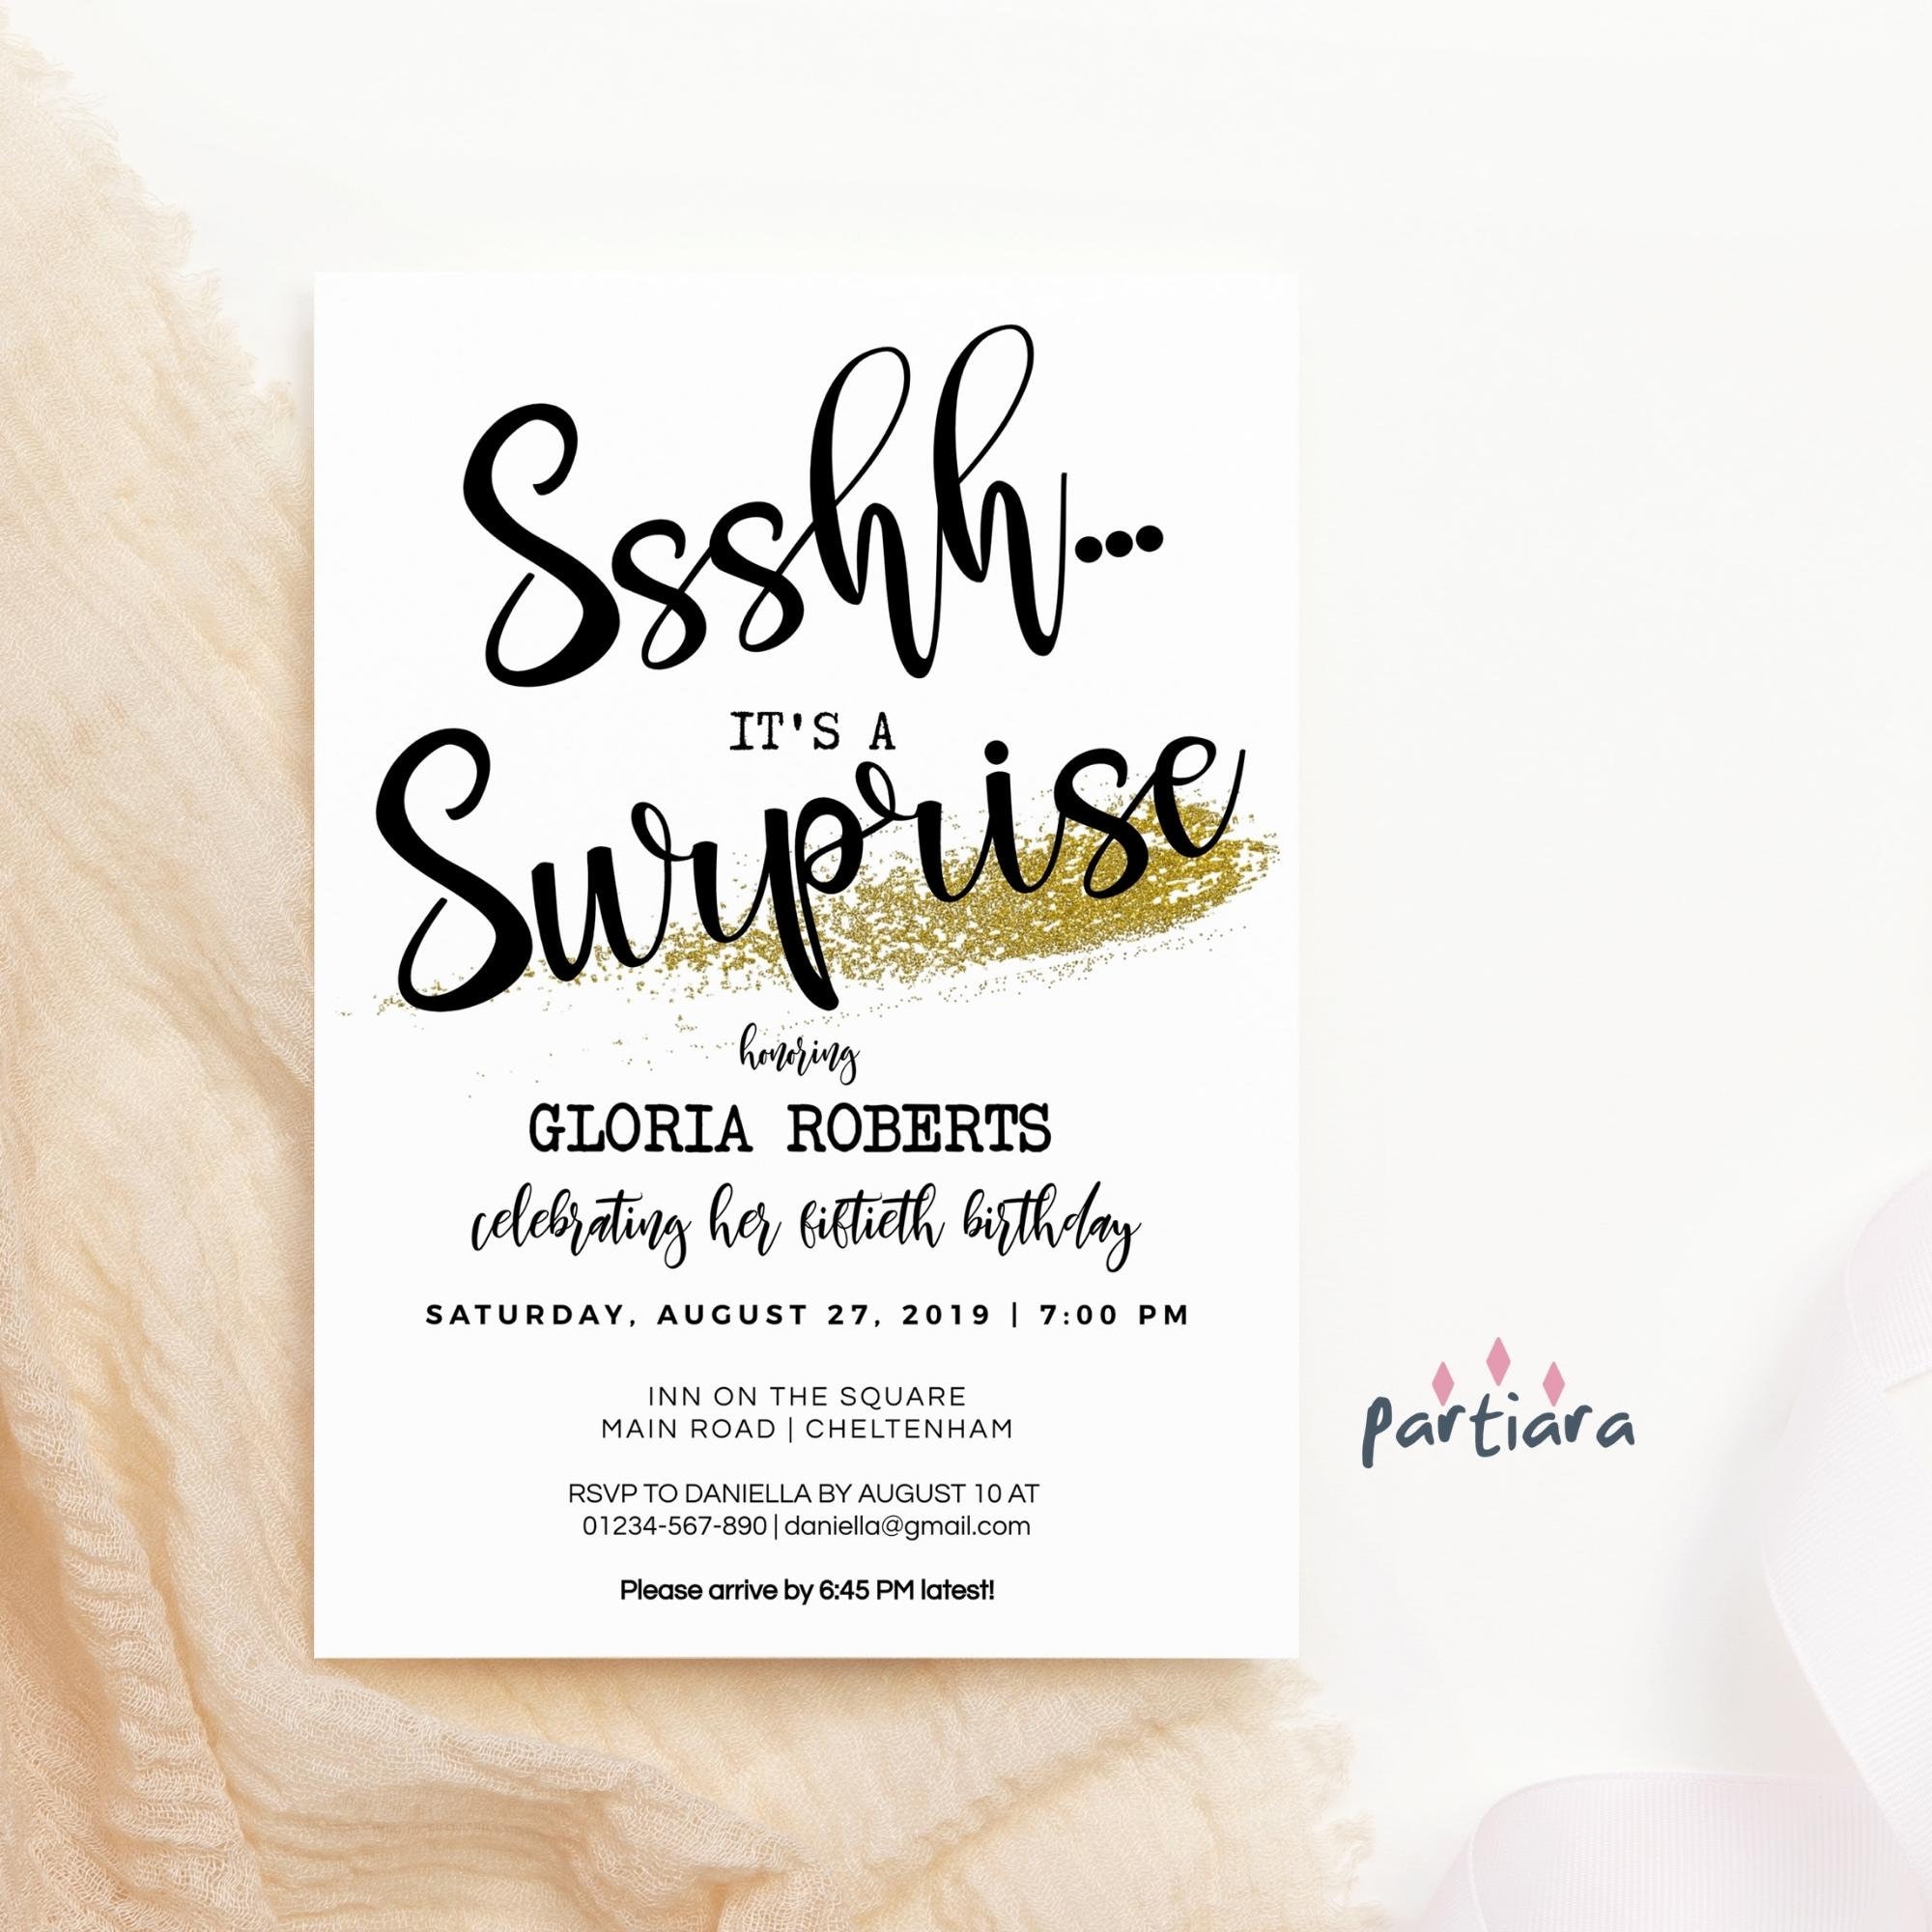 Ssshhh Its a Surprise Party Invite Digital Download Black pic picture